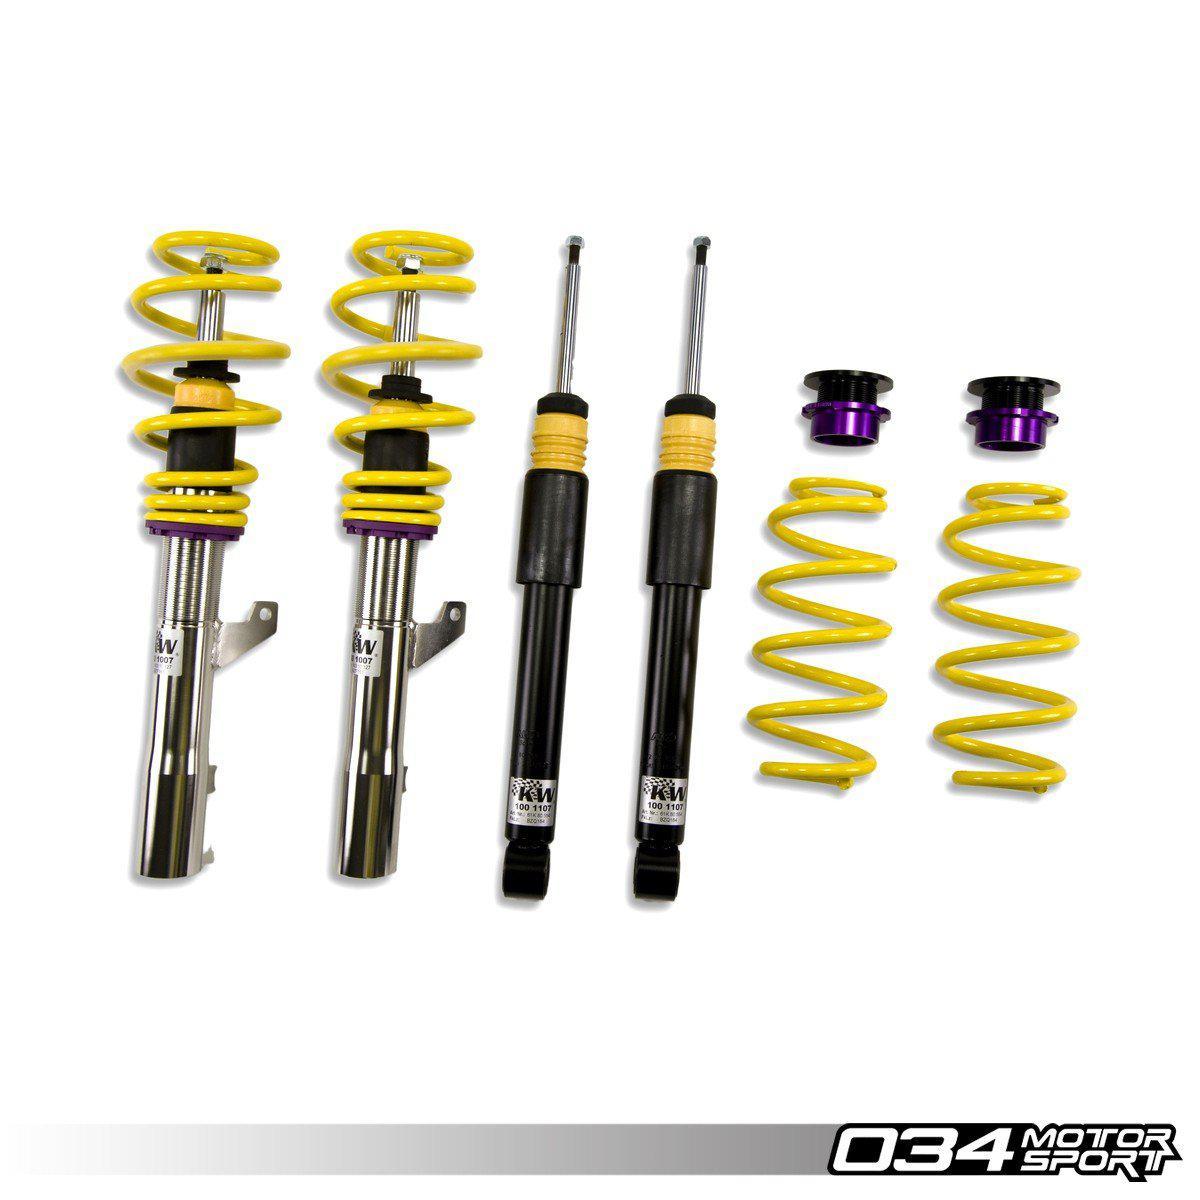 KW Variant 3 Coilover Suspension, C7/C7.5 Audi A6, FWD &amp; Quattro-A Little Tuning Co